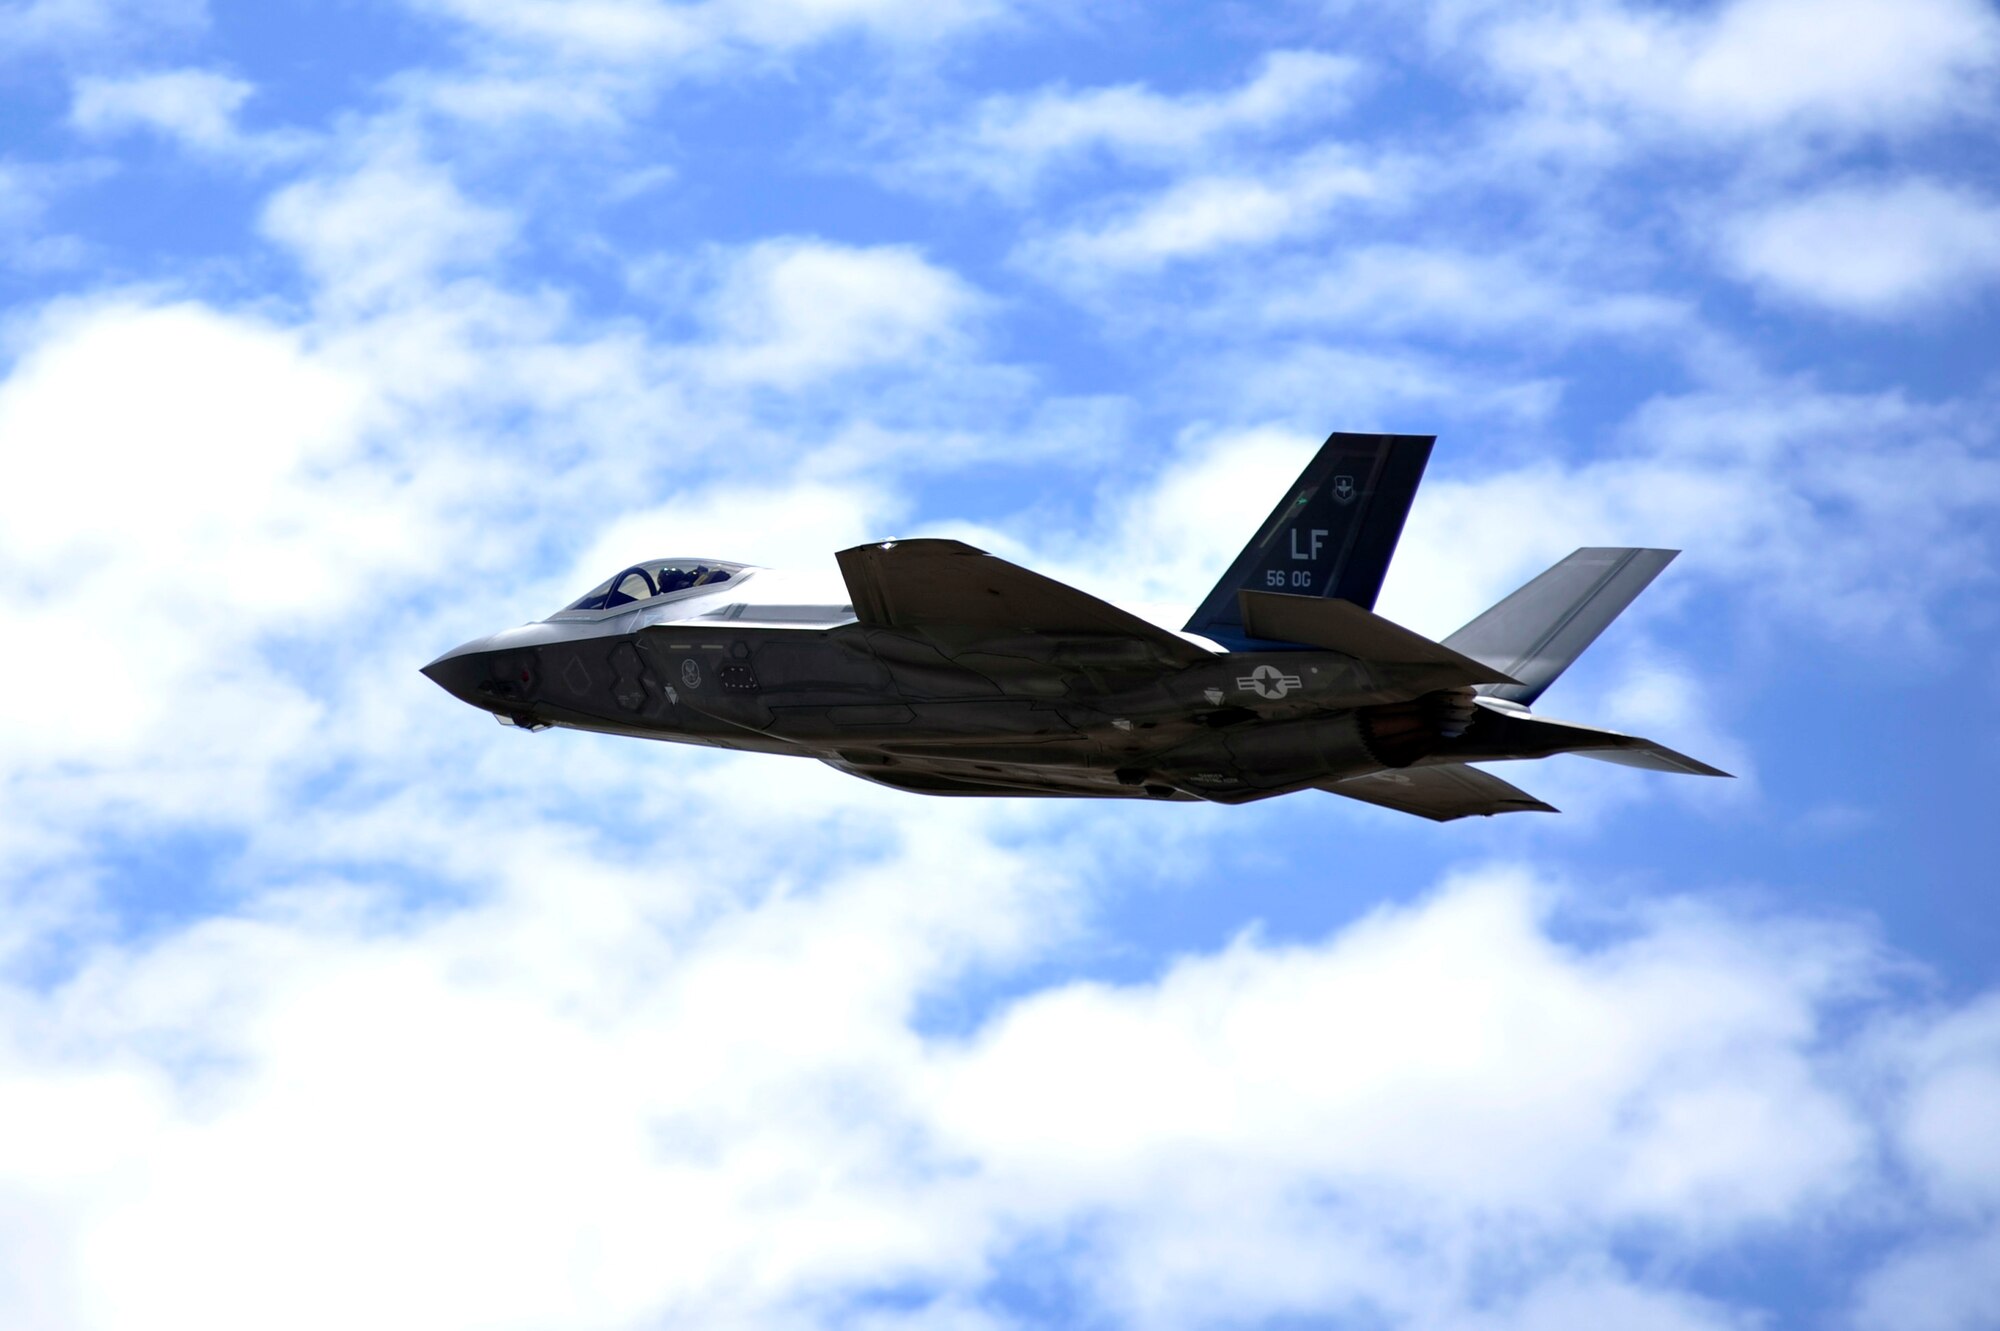 An F-35A Lightning II soars through the sky July 17, 2017 at Luke Air Force Base, Ariz. The first F-35A Lightning II basic course at Luke held the capstone flight today facing F-35s against F-16 Fighting Falcons in a simulated combat environment. (U.S. Air Force photo/Airman 1st Class Pedro Mota)